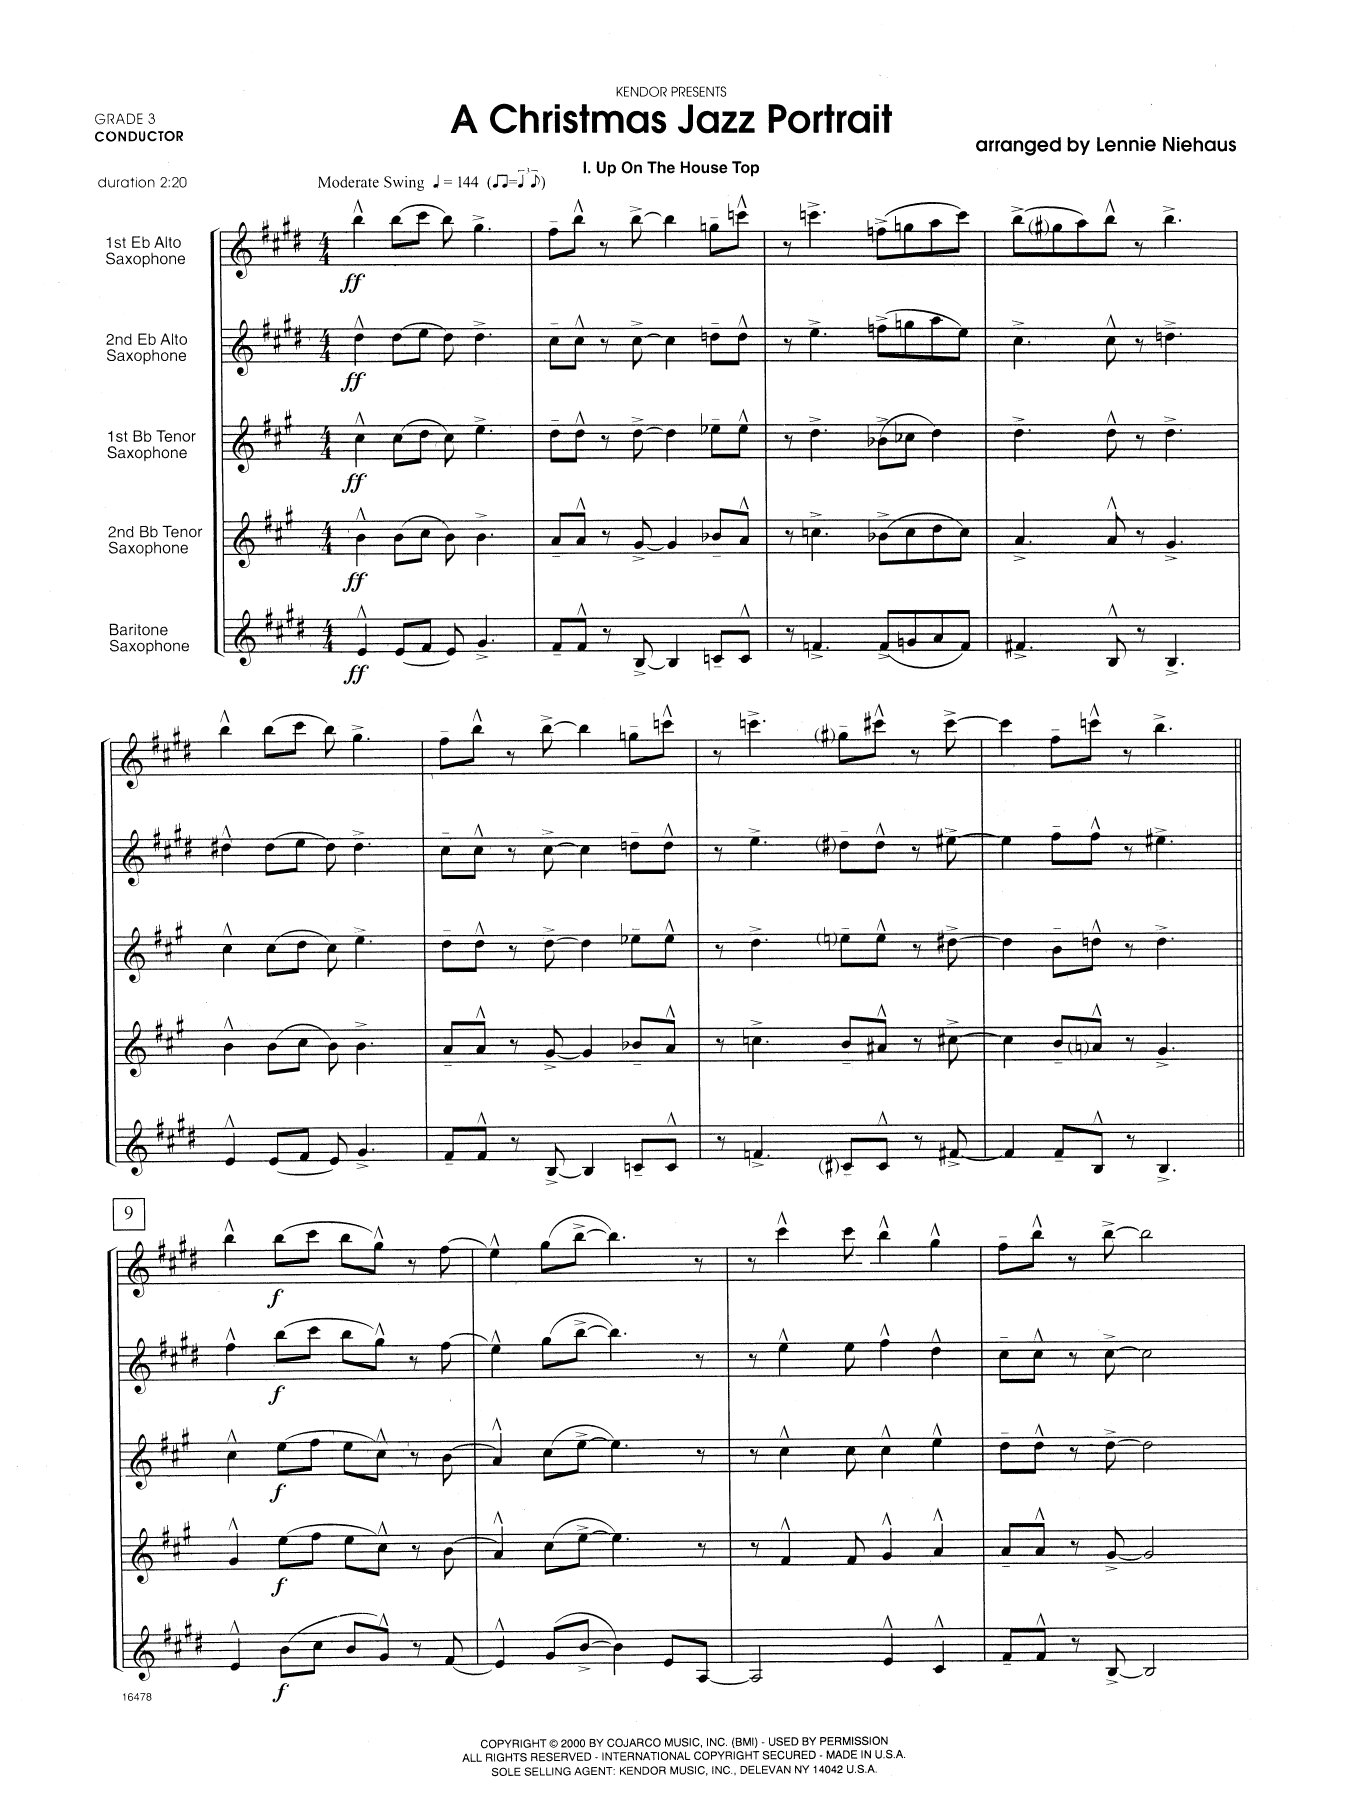 Lennie Niehaus A Christmas Jazz Portrait - Full Score sheet music notes and chords. Download Printable PDF.